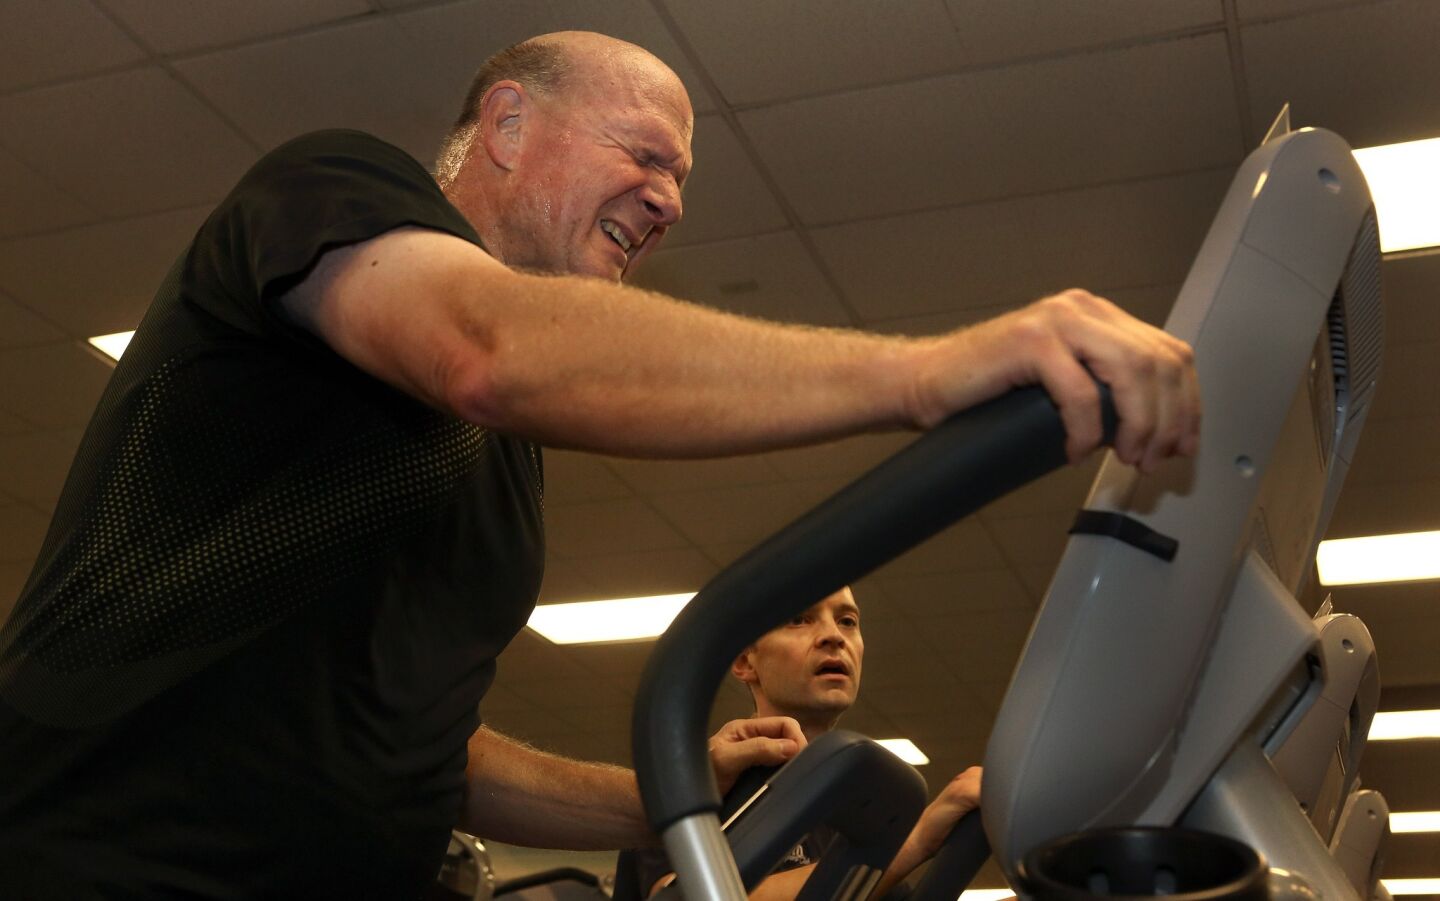 Clippers owner Steve Ballmer grimaces while working out on an elliptical machine at Pro Sports Club in Bellevue, Wash. At right is his trainer Carl Swedberg.